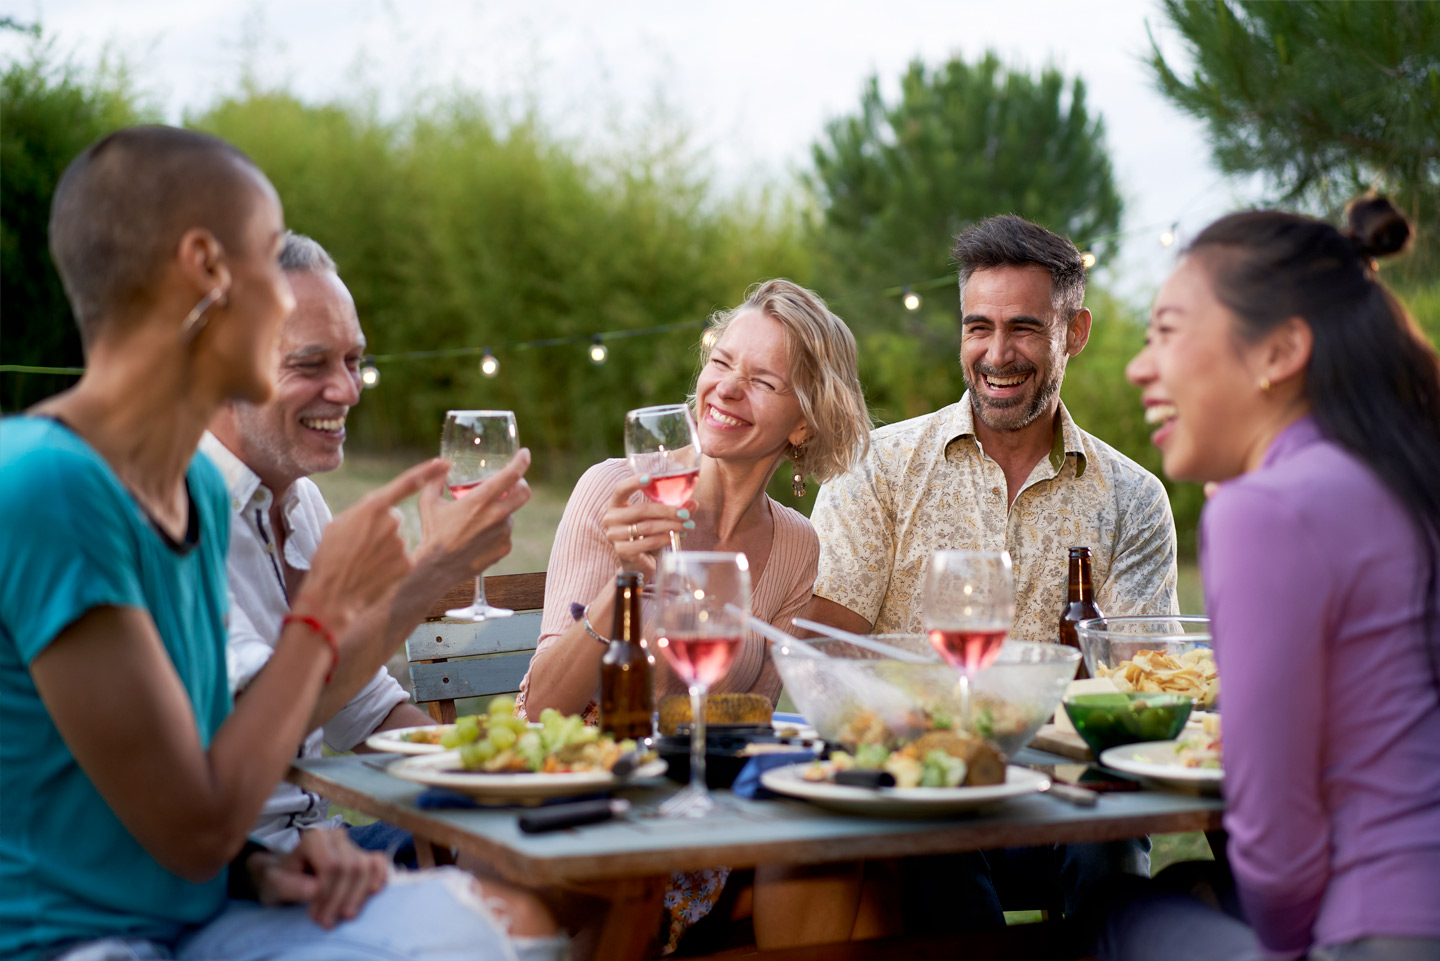 Happy middle-aged men and women toasting healthy food at farm house picnic - Life style concept with cheerful friends having fun together on afternoon